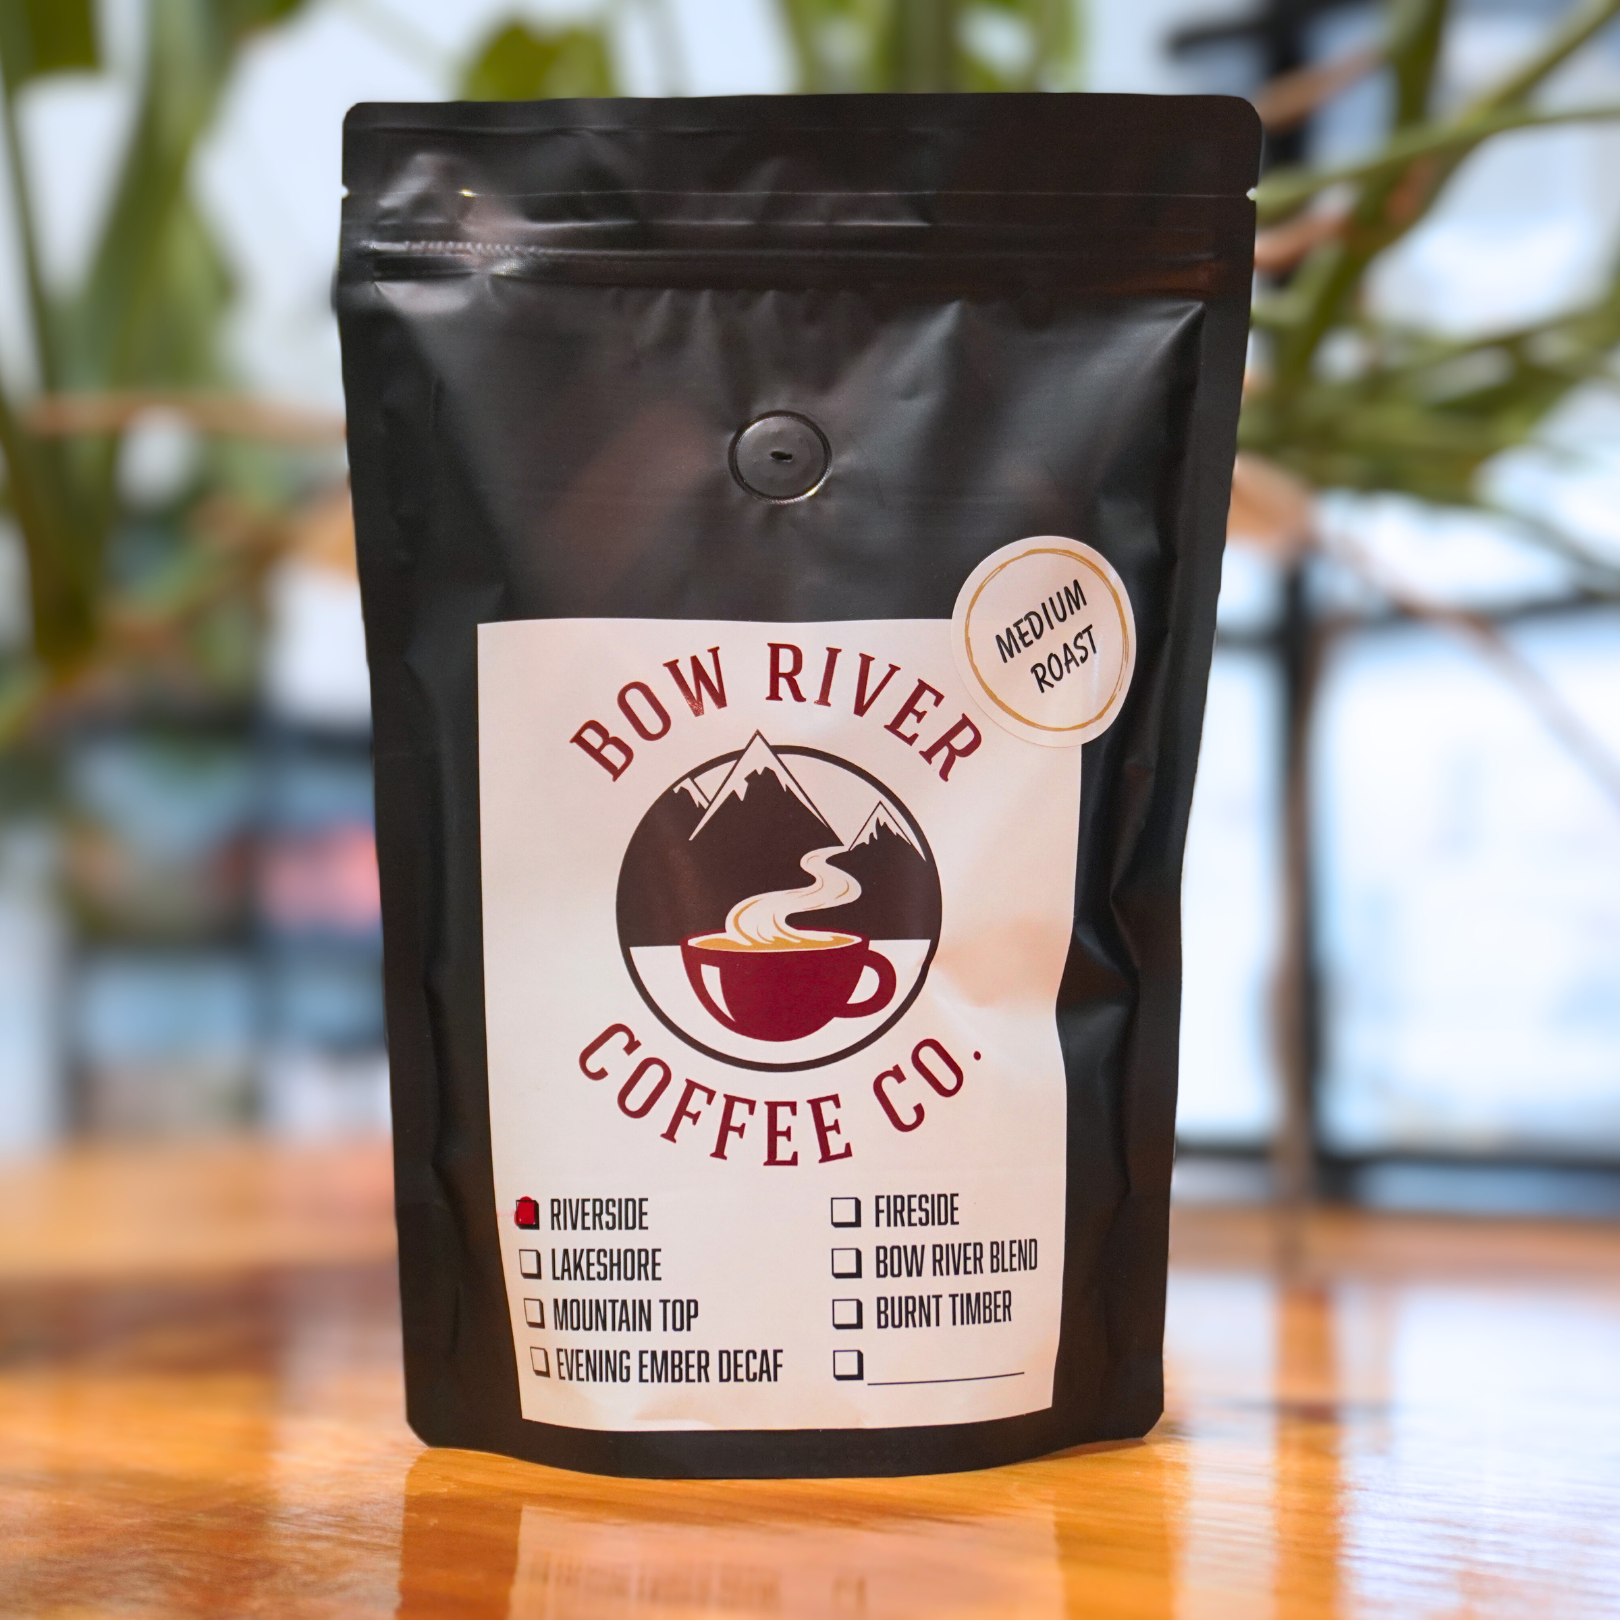 Bow River Coffee Co. Riverside Coffee Beans